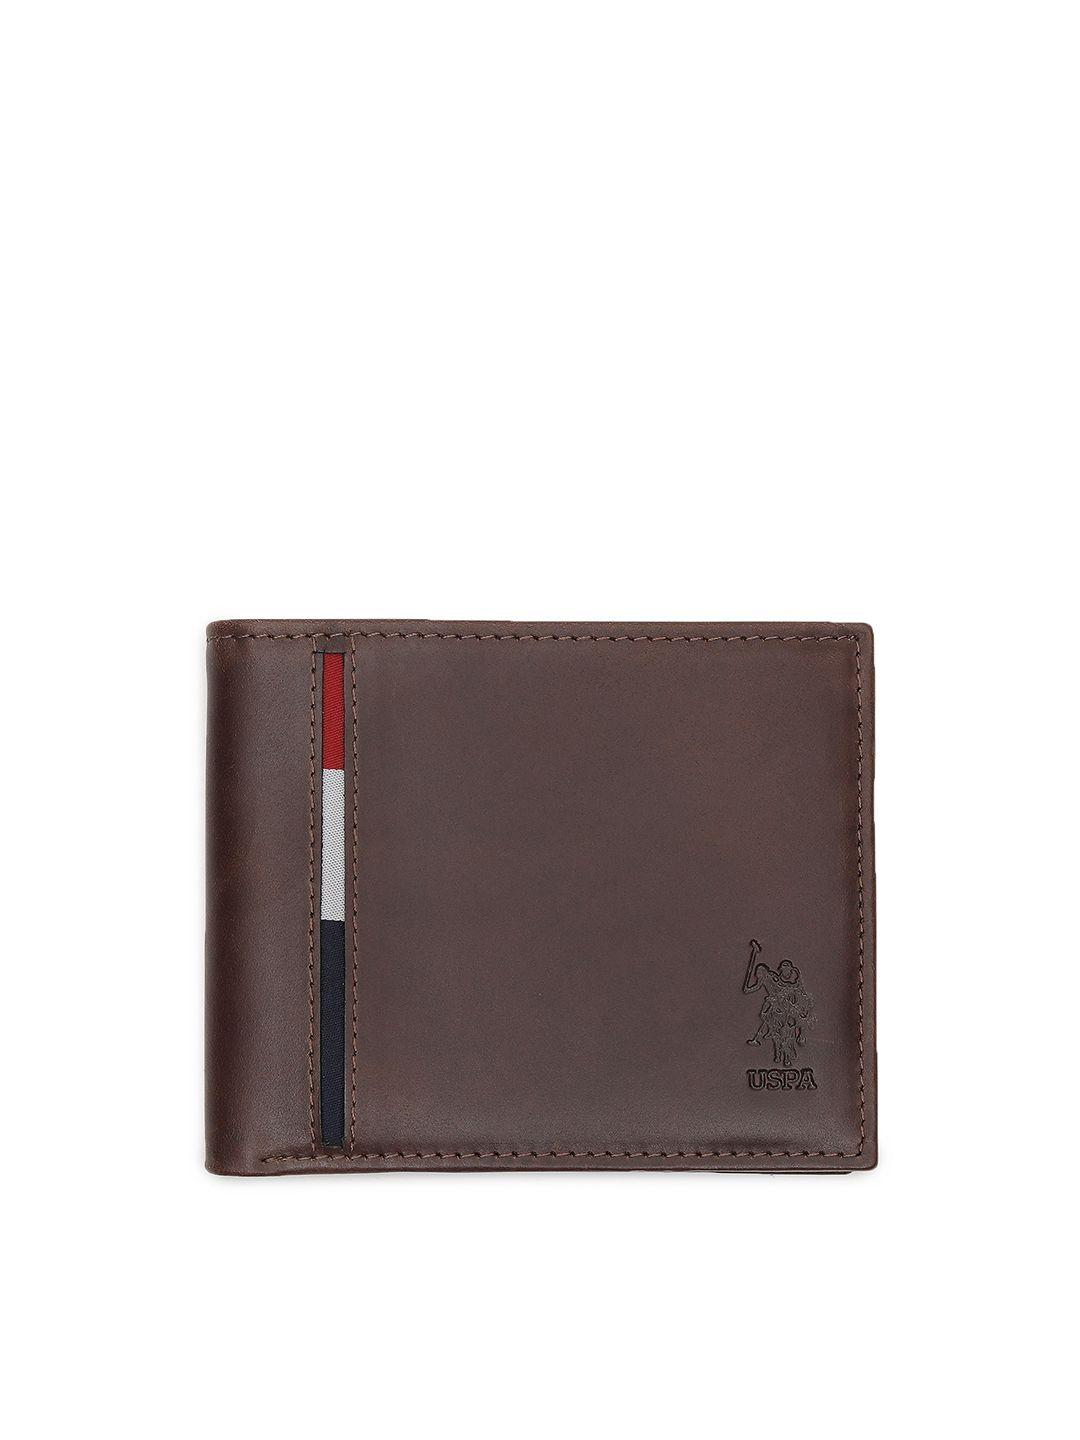 u-s-polo-assn-men-brown-leather-two-fold-wallet